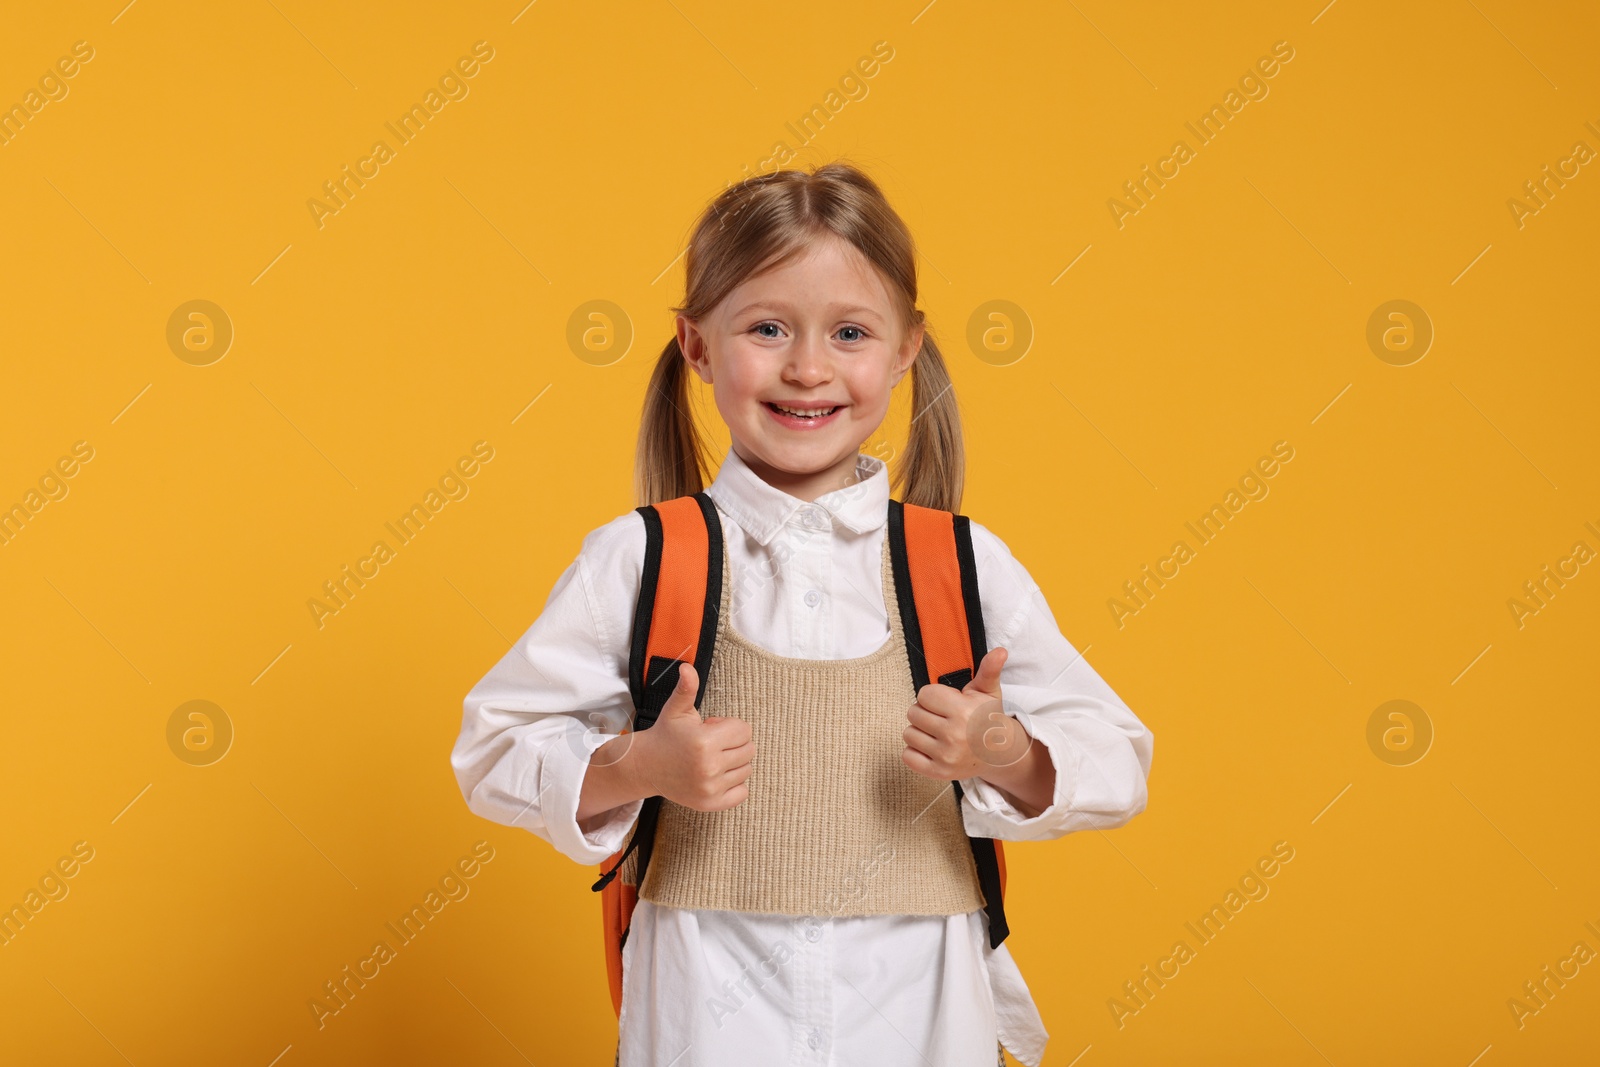 Photo of Happy schoolgirl with backpack showing thumbs up gesture on orange background